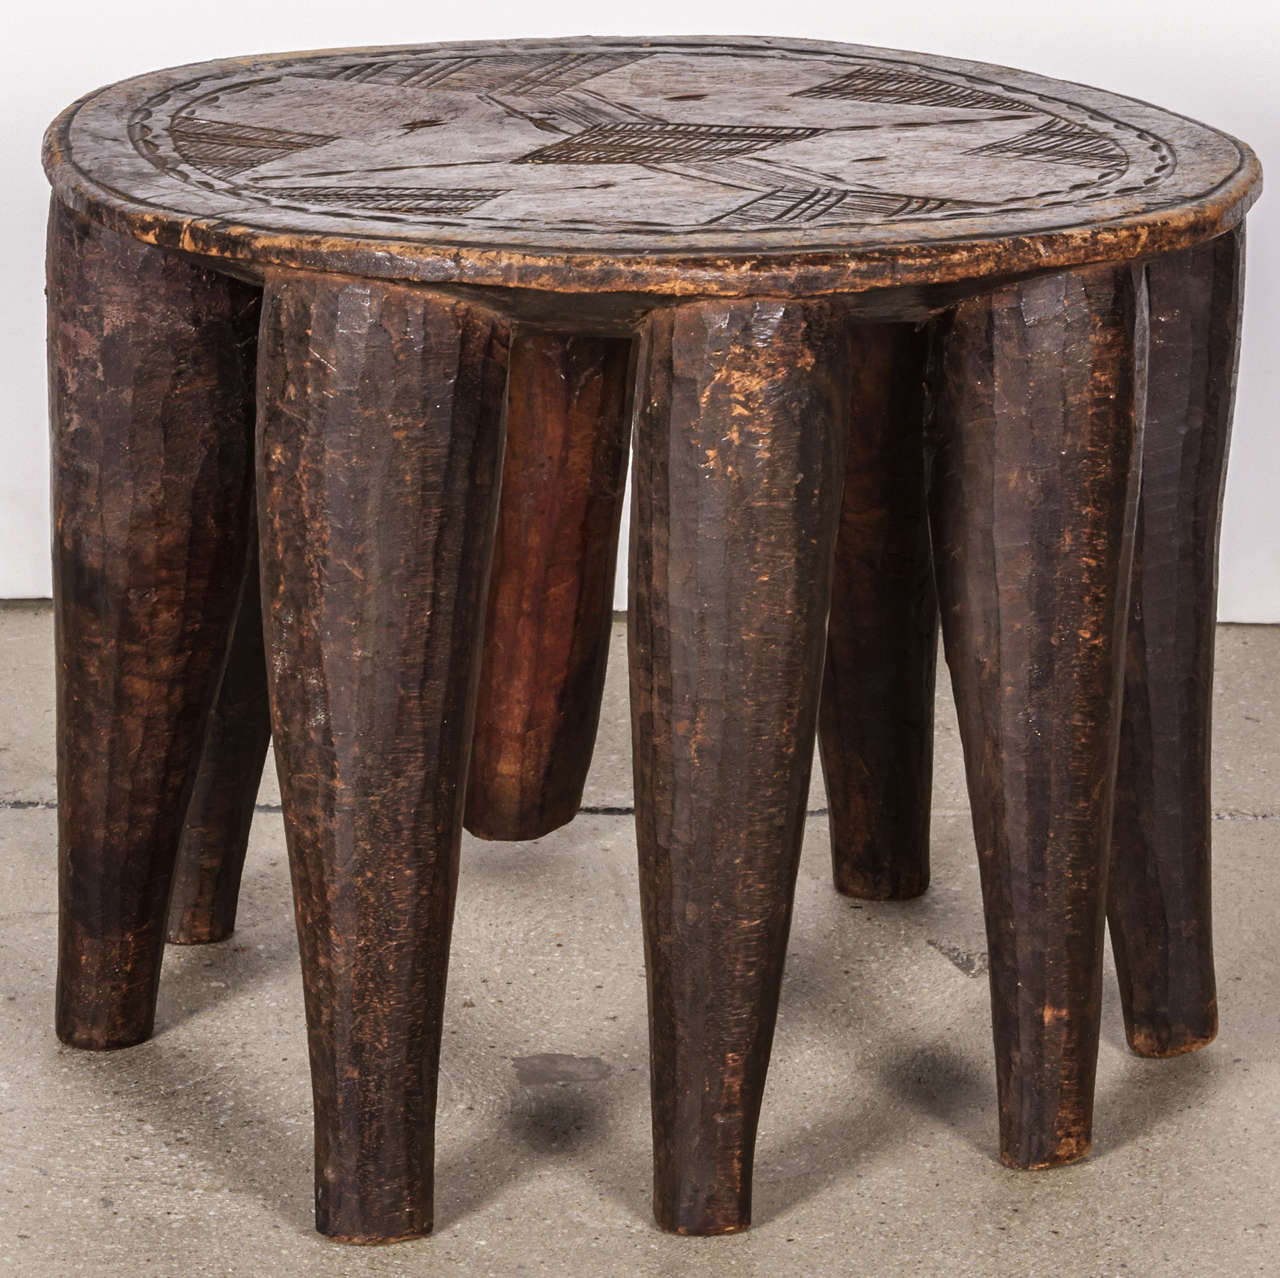 Elephant stool from the Nupe tribe.  Africa circa 1970, possibly earlier.